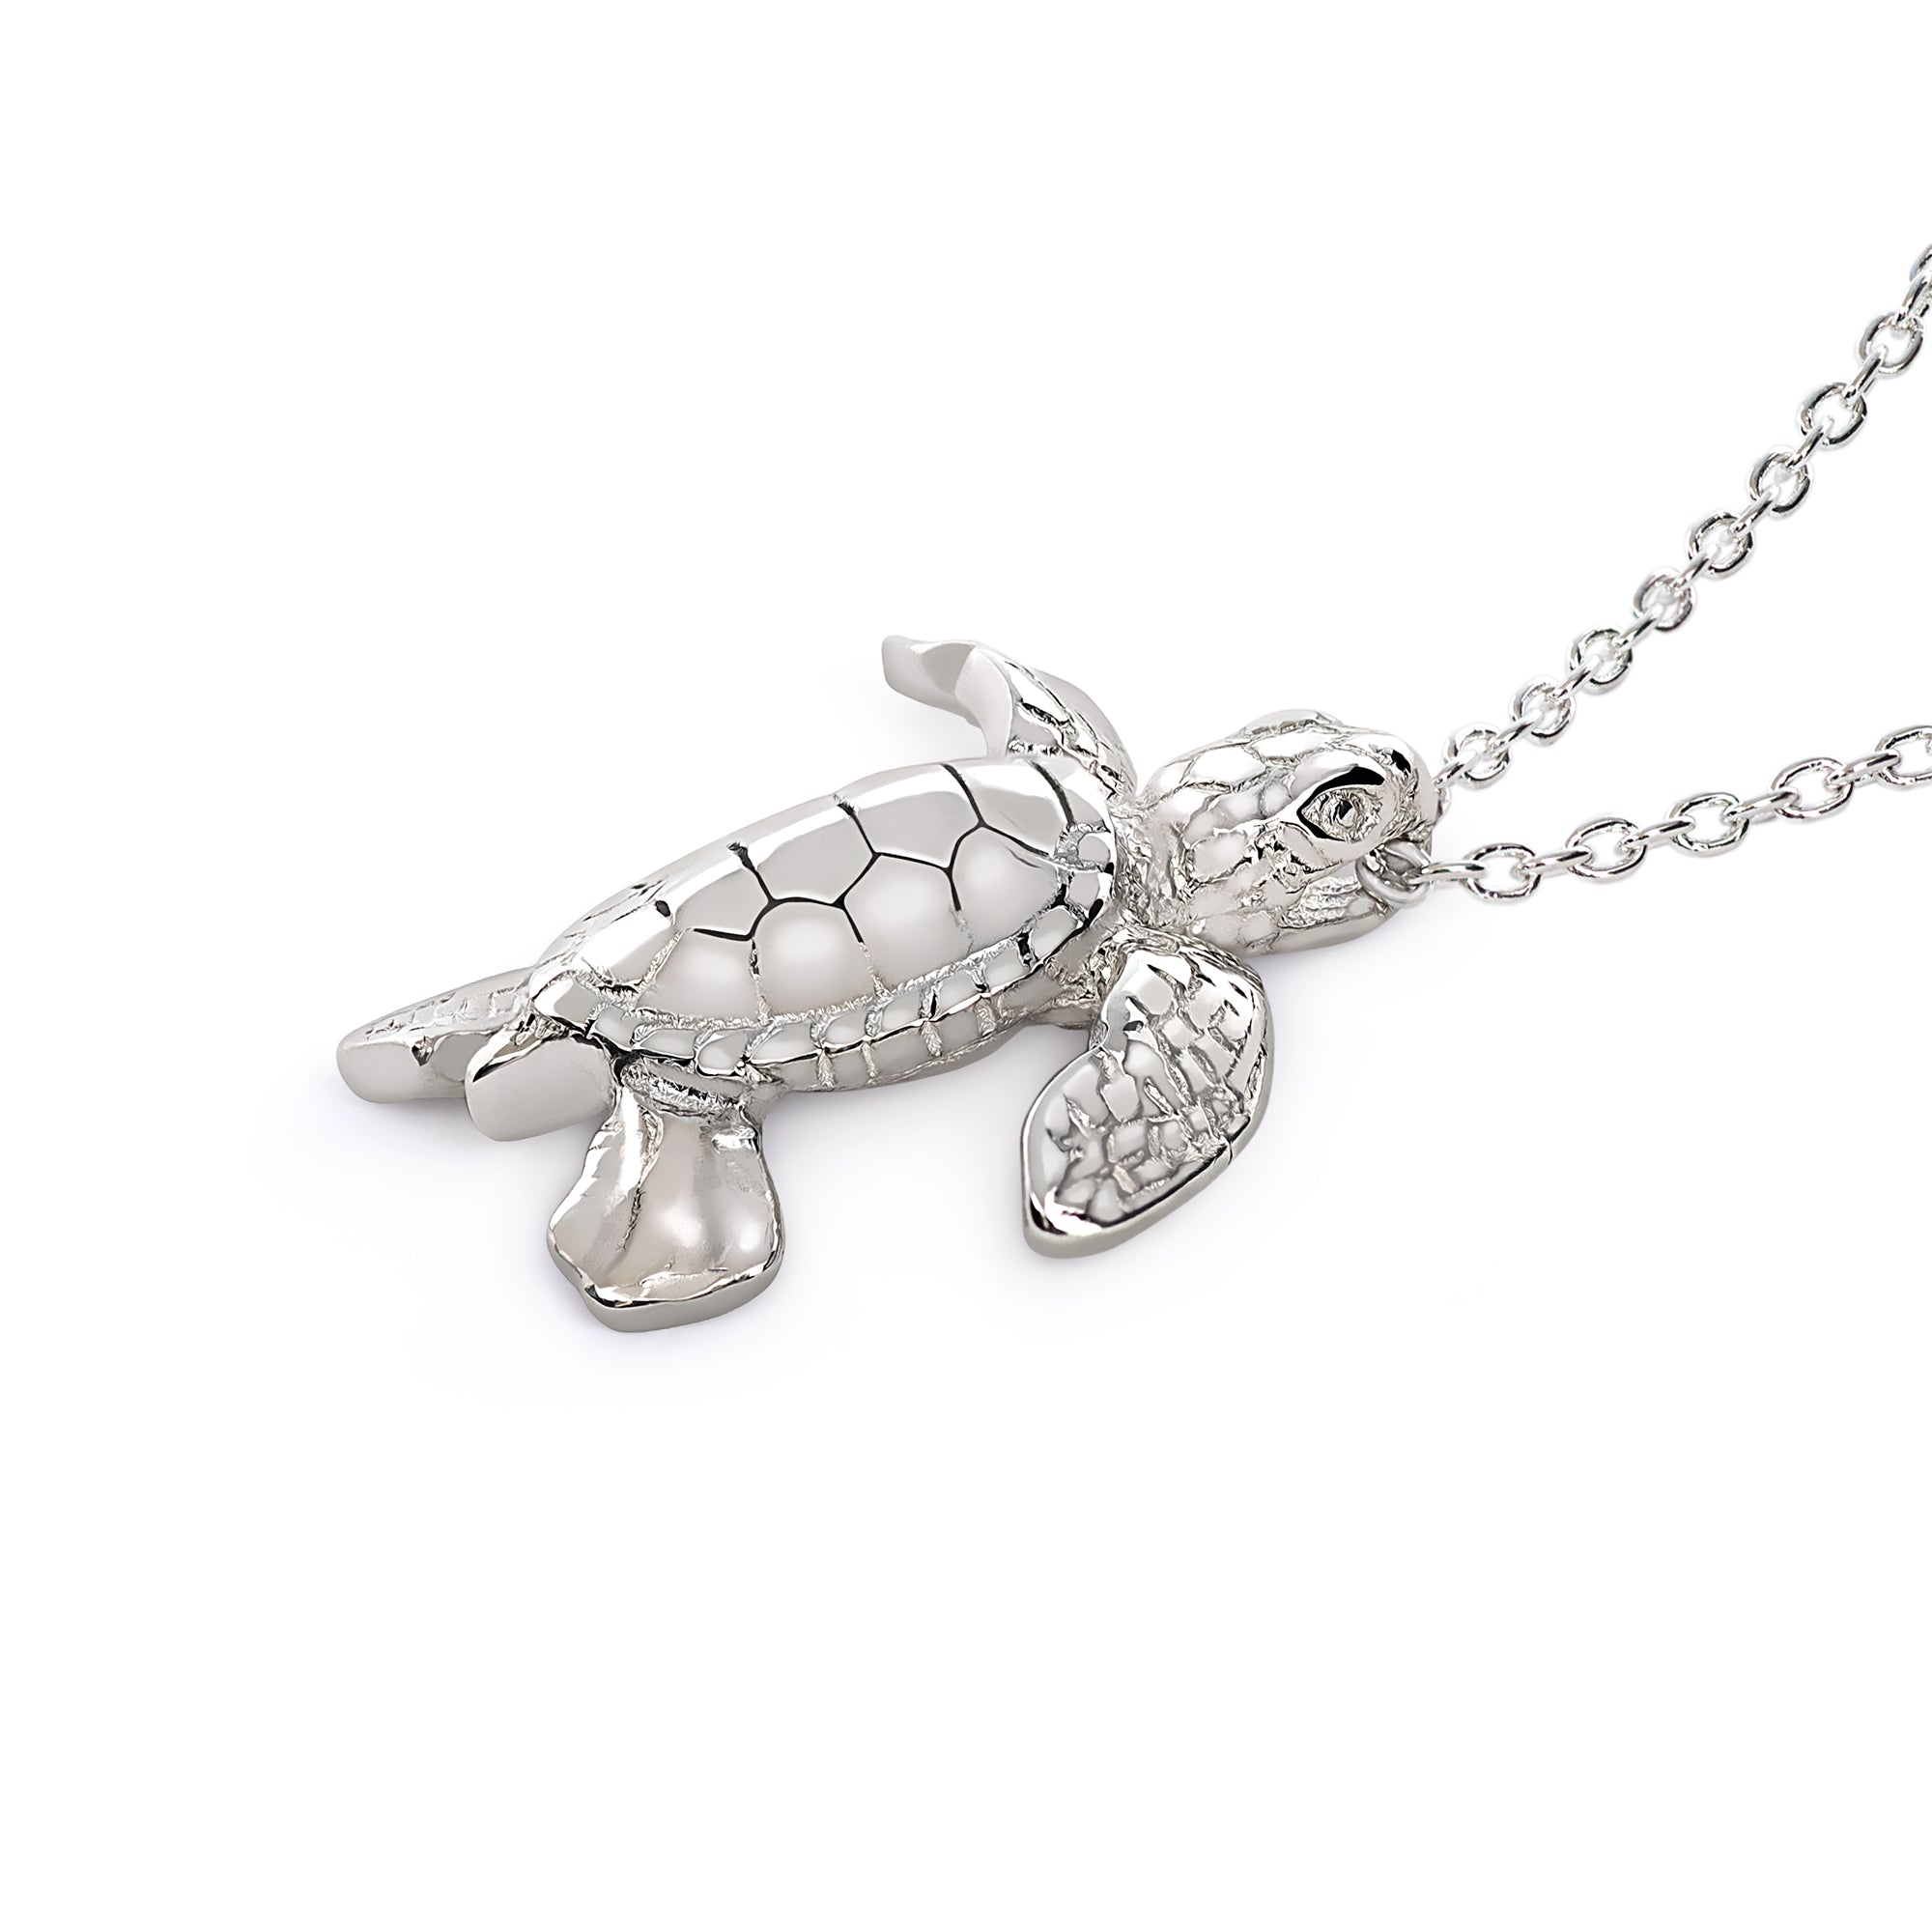 16-20 Mireval Sterling Silver Turtle Charm on a Sterling Silver Chain Necklace 